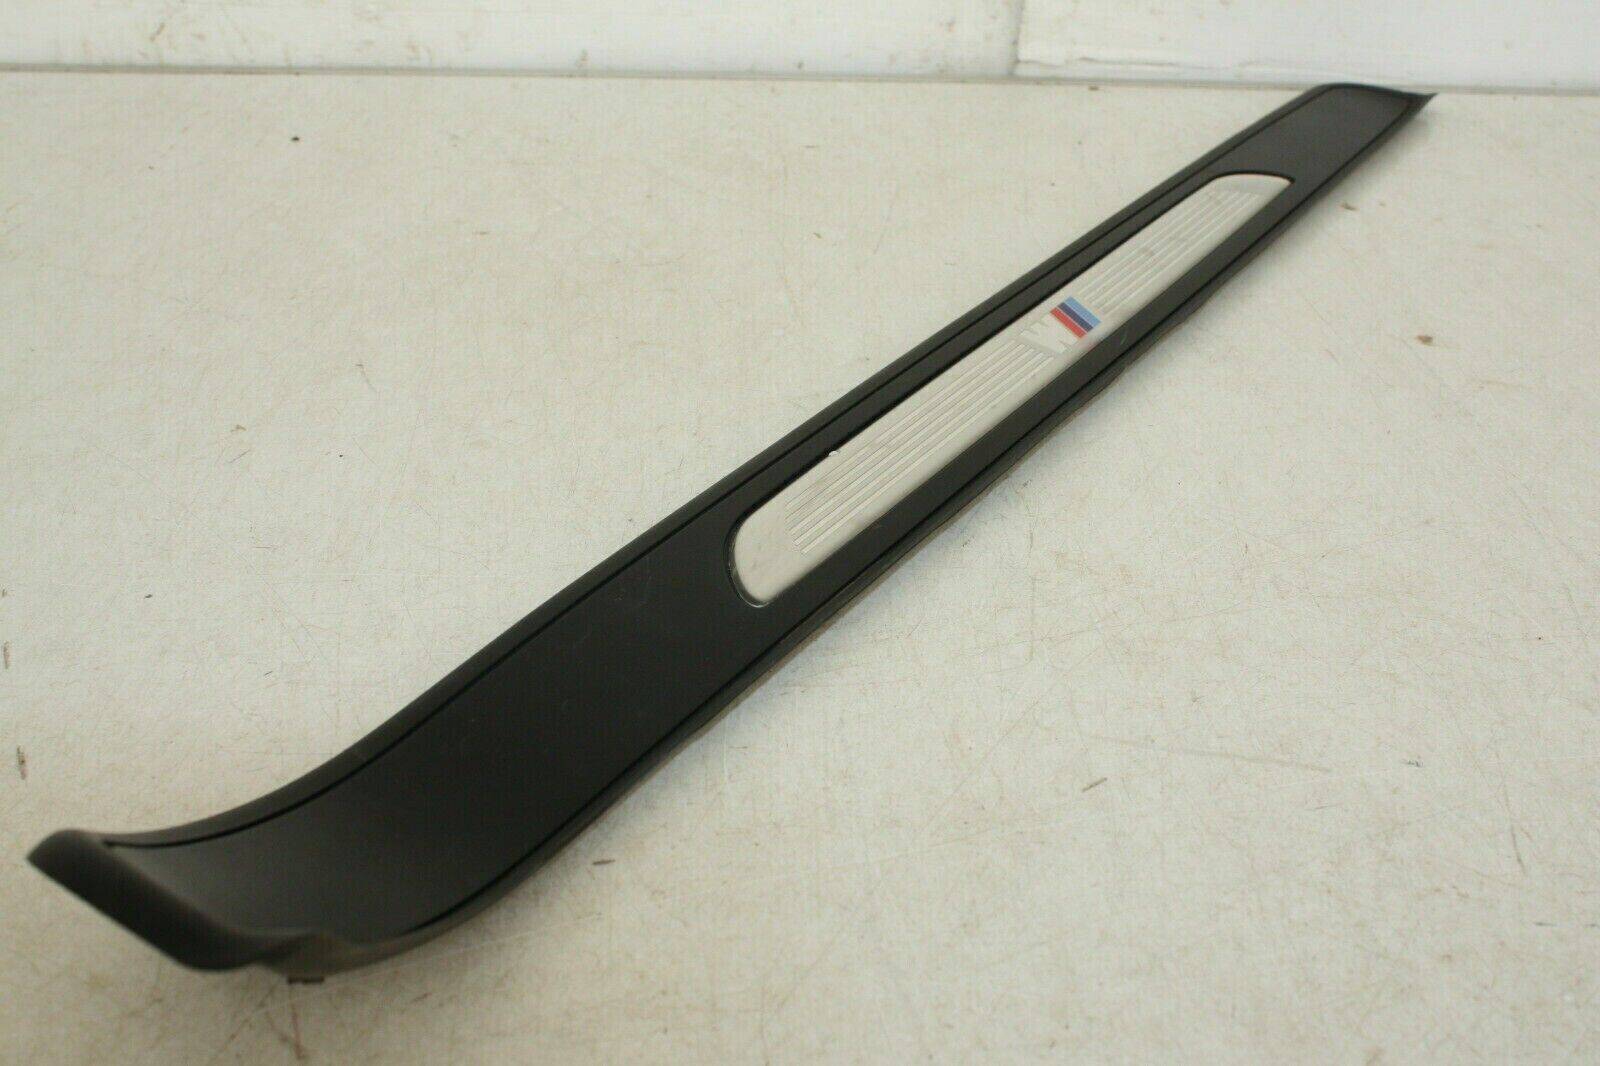 BMW-3-SERIES-FRONT-LEFT-DOOR-ENTRANCE-SILL-STRIP-2006-TO-2010-175431720438-8